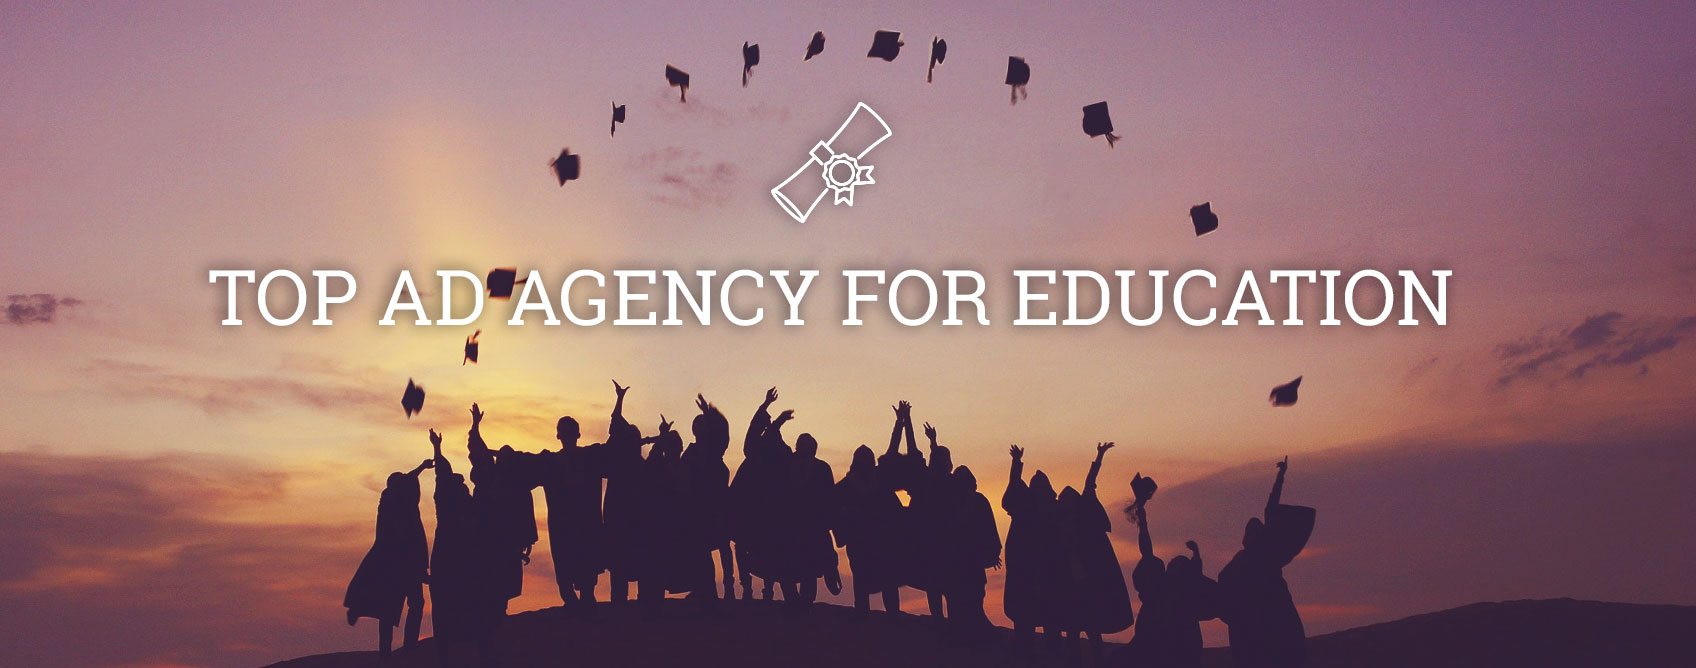 Forge Worldwide Named a Top Ad Agency for Education by Clutch